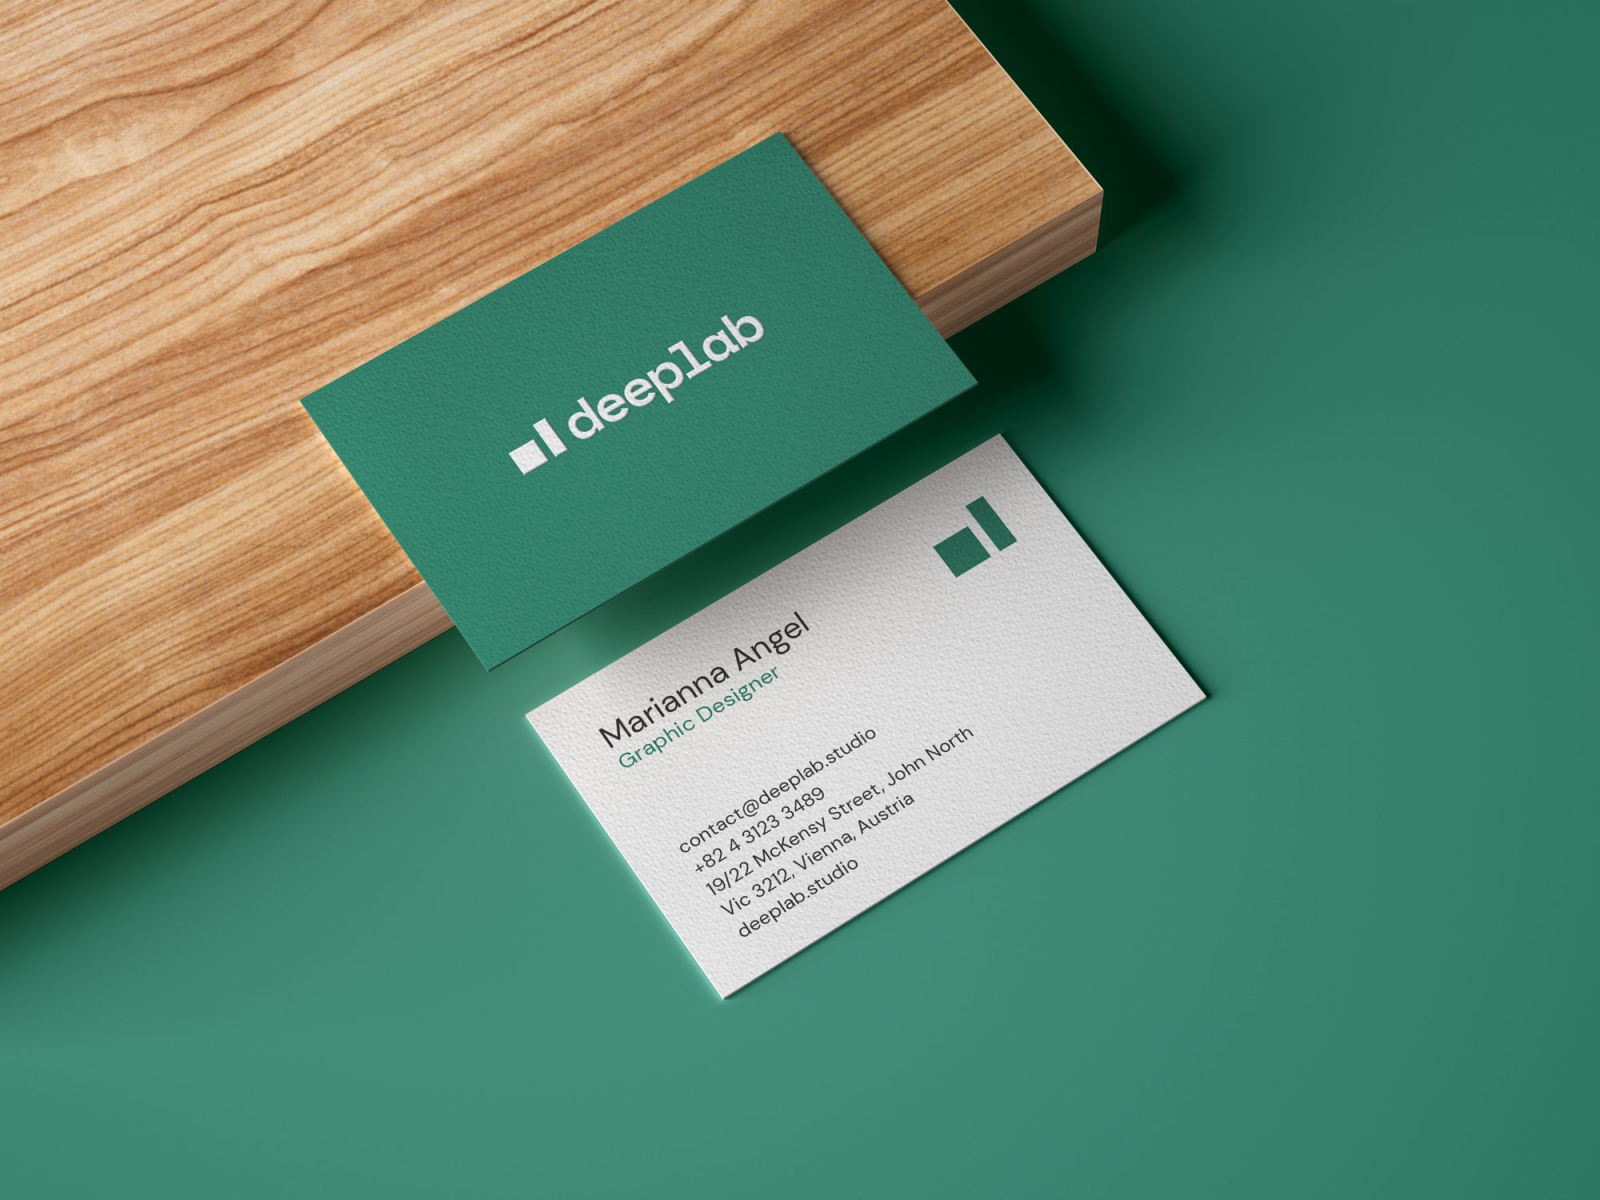 Download Free Realistic Business Card Mockup On Wooden Board By Deeplab Studio On Dribbble